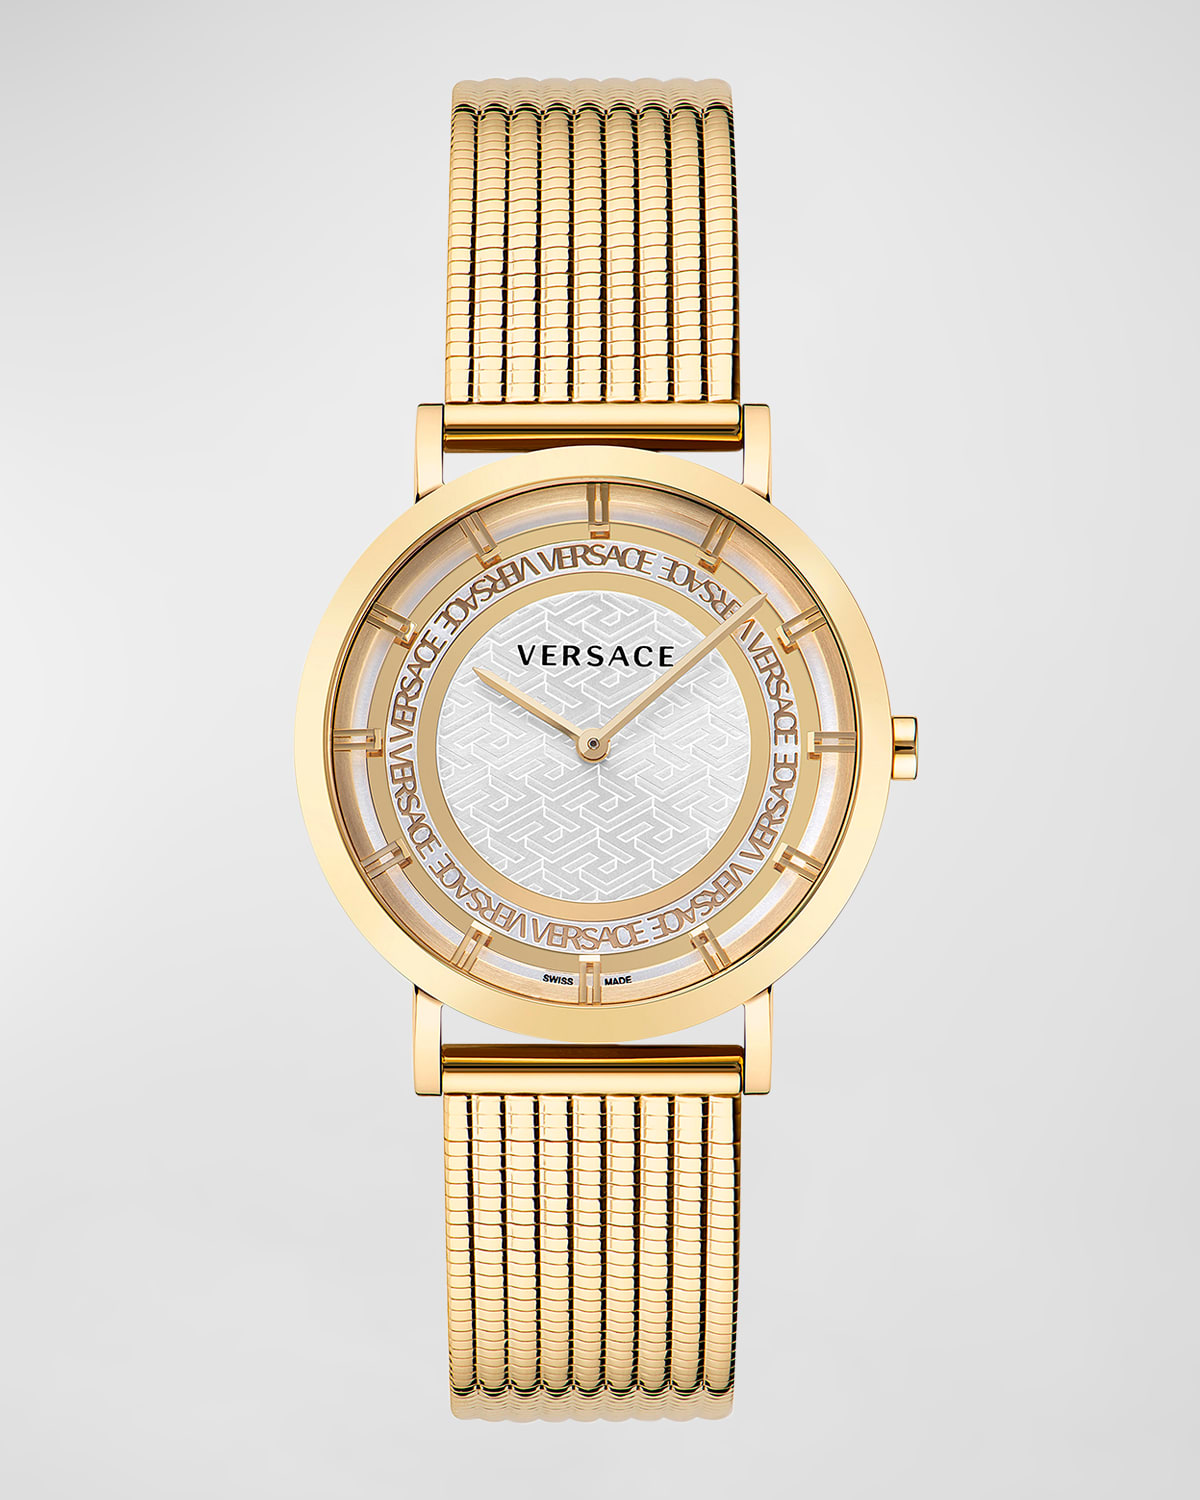 Versace New Generation Watch with Bracelet Strap, Gold